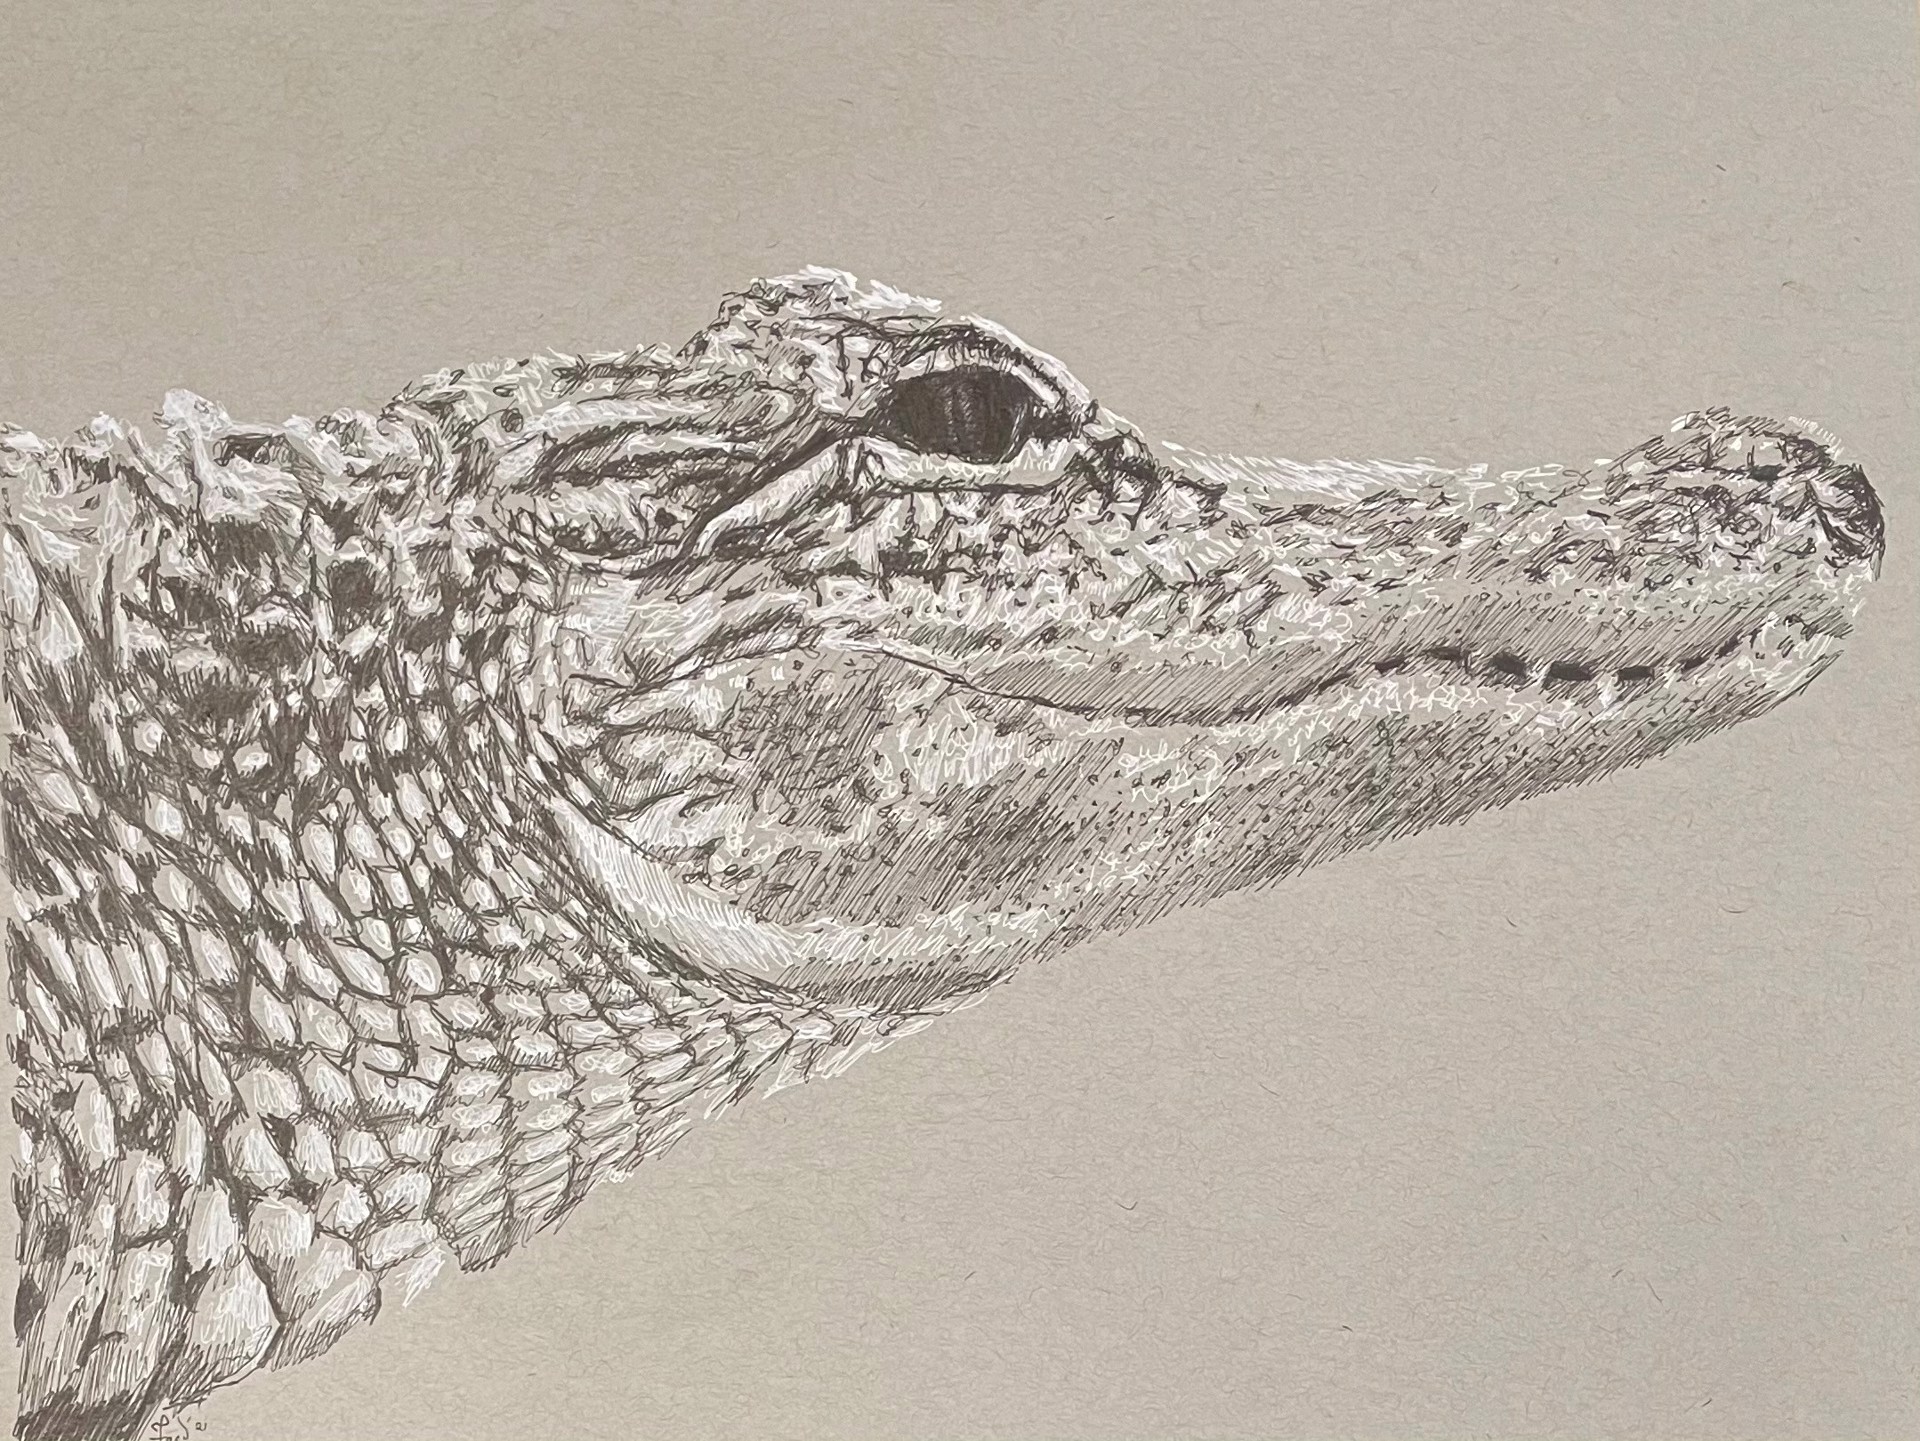 Alligator in Profile by Ed Ford